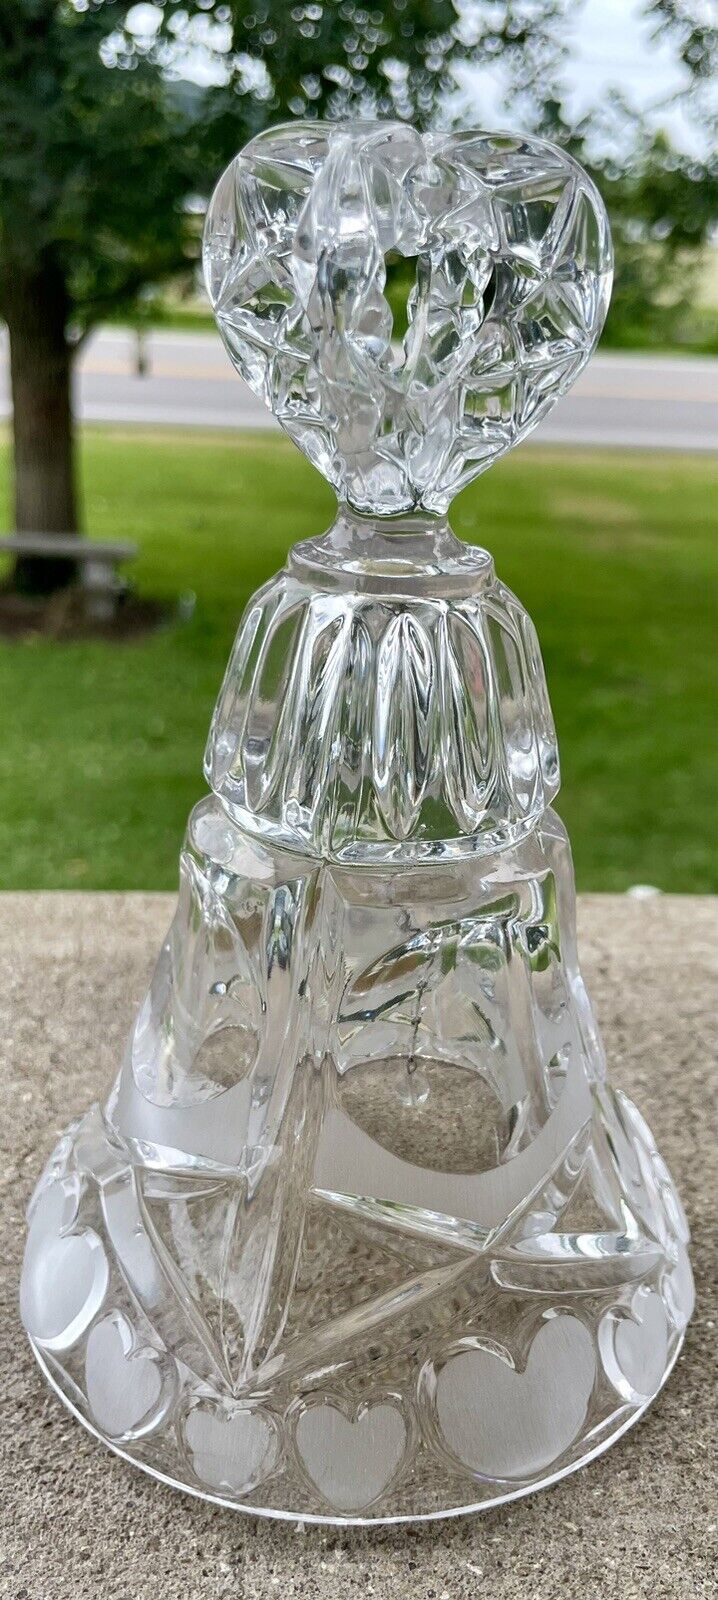 VINTAGE ECHT BLEIKRISTALL WEDDING BELL 24% LEAD CRYSTAL MADE IN W. GERMANY